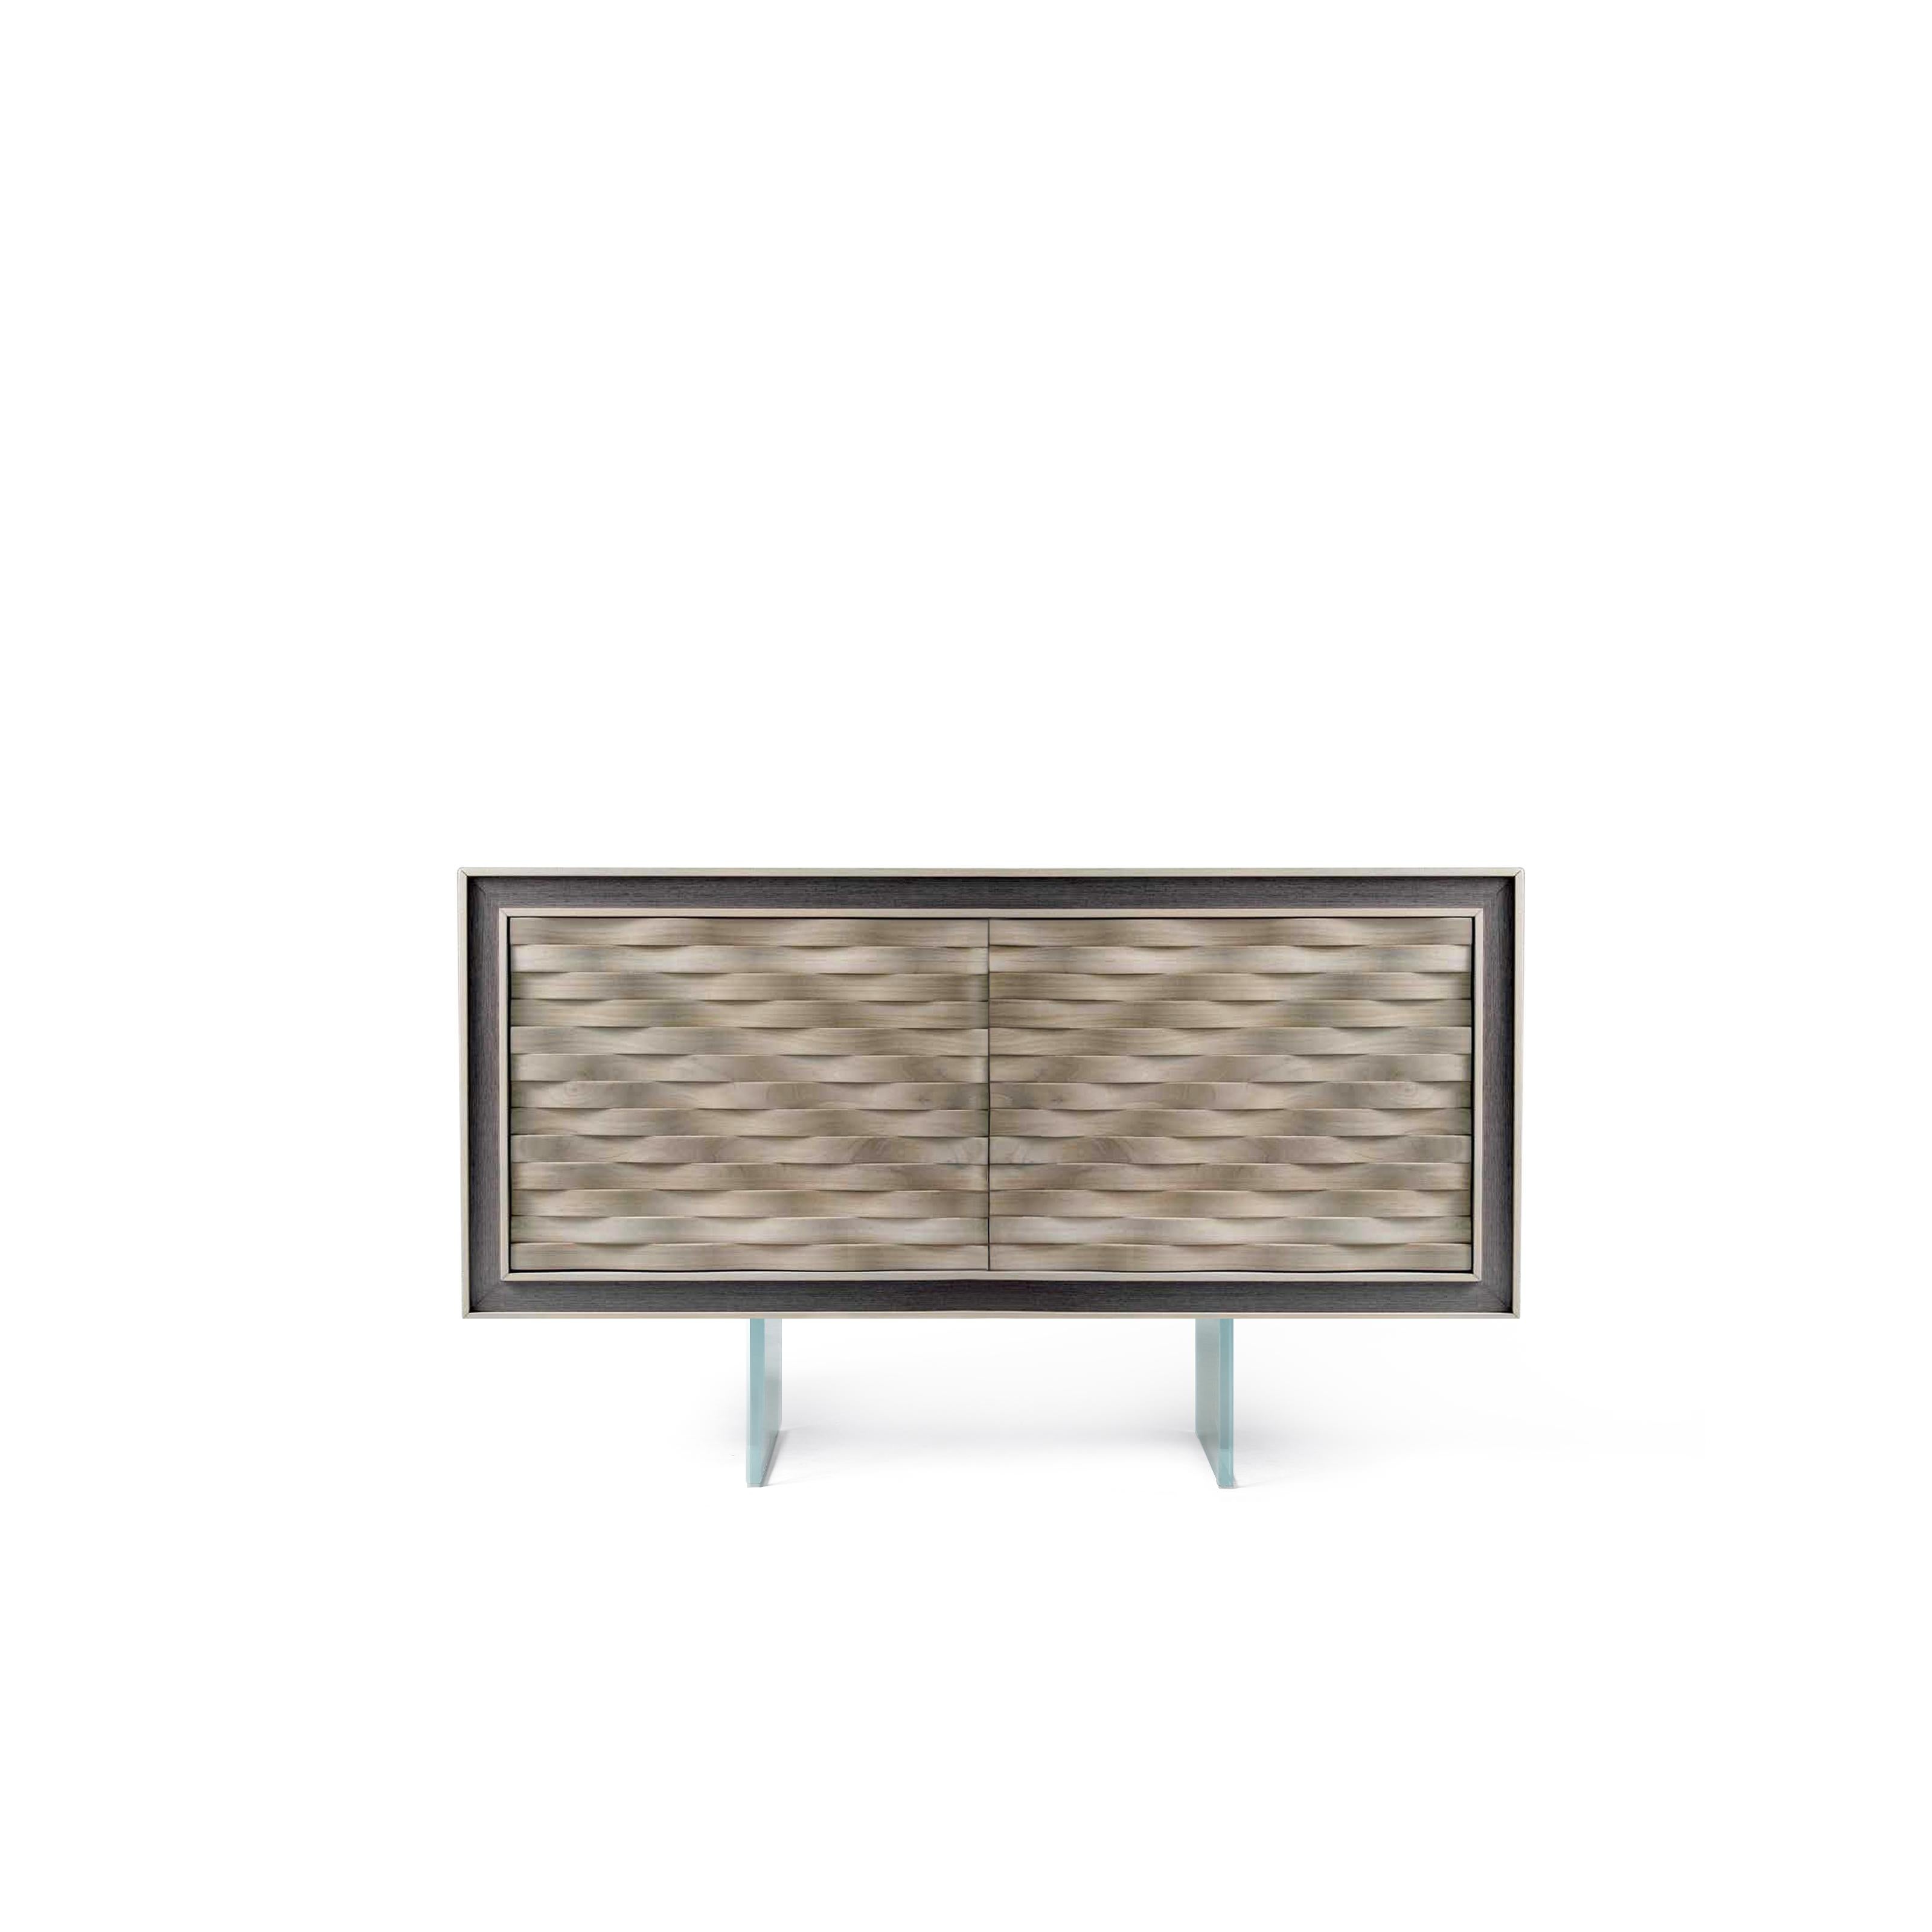 Modern Quadra Nastro Solid Wood Sideboard, Walnut in Natural Grey Finish, Contemporary For Sale